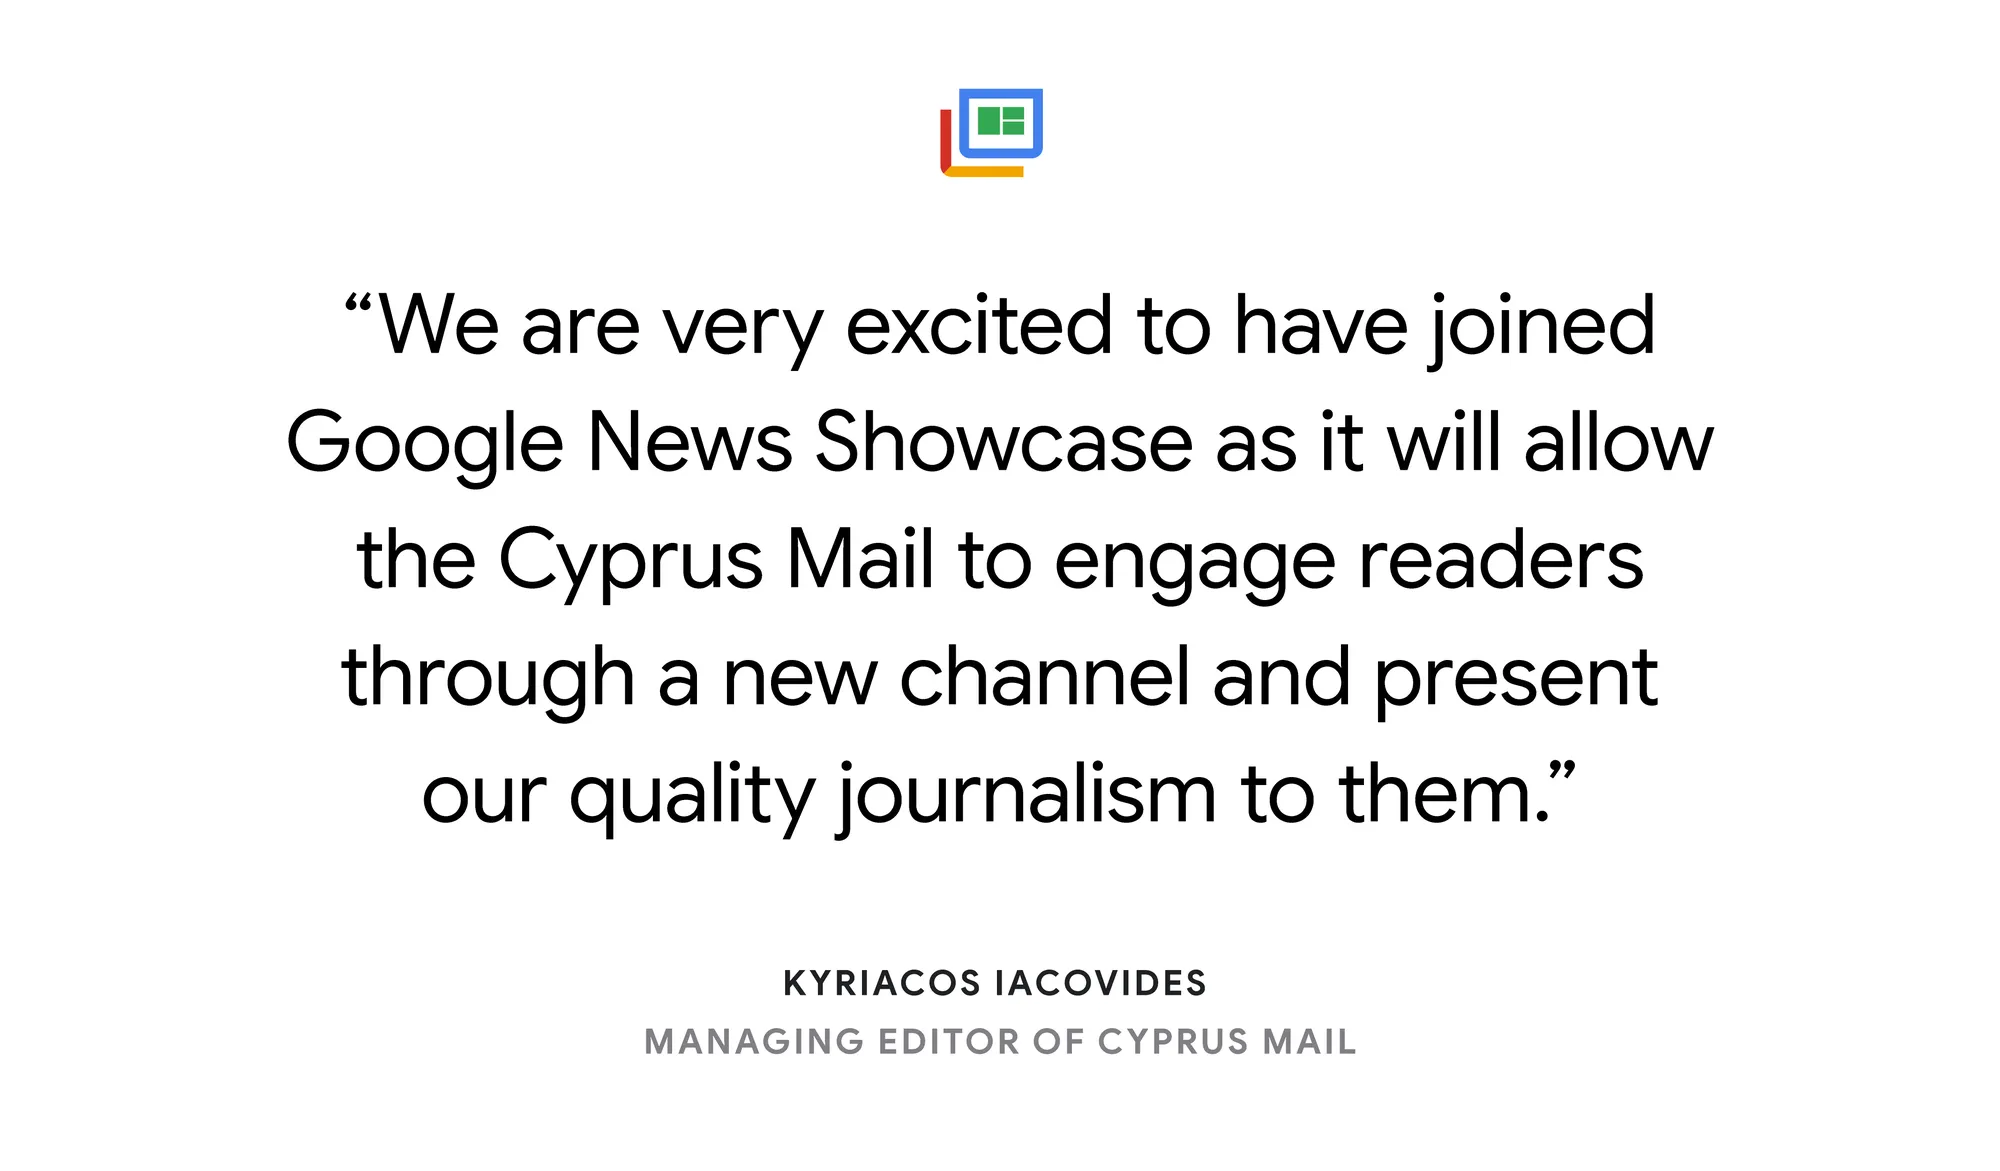 Illustrated card reading: “We are very excited to have joined Google News Showcase as it will allow the Cyprus Mail to engage readers through a new channel and present our quality journalism to them,” says Kyriacos Iacovides, Managing Editor of Cyprus Mail.